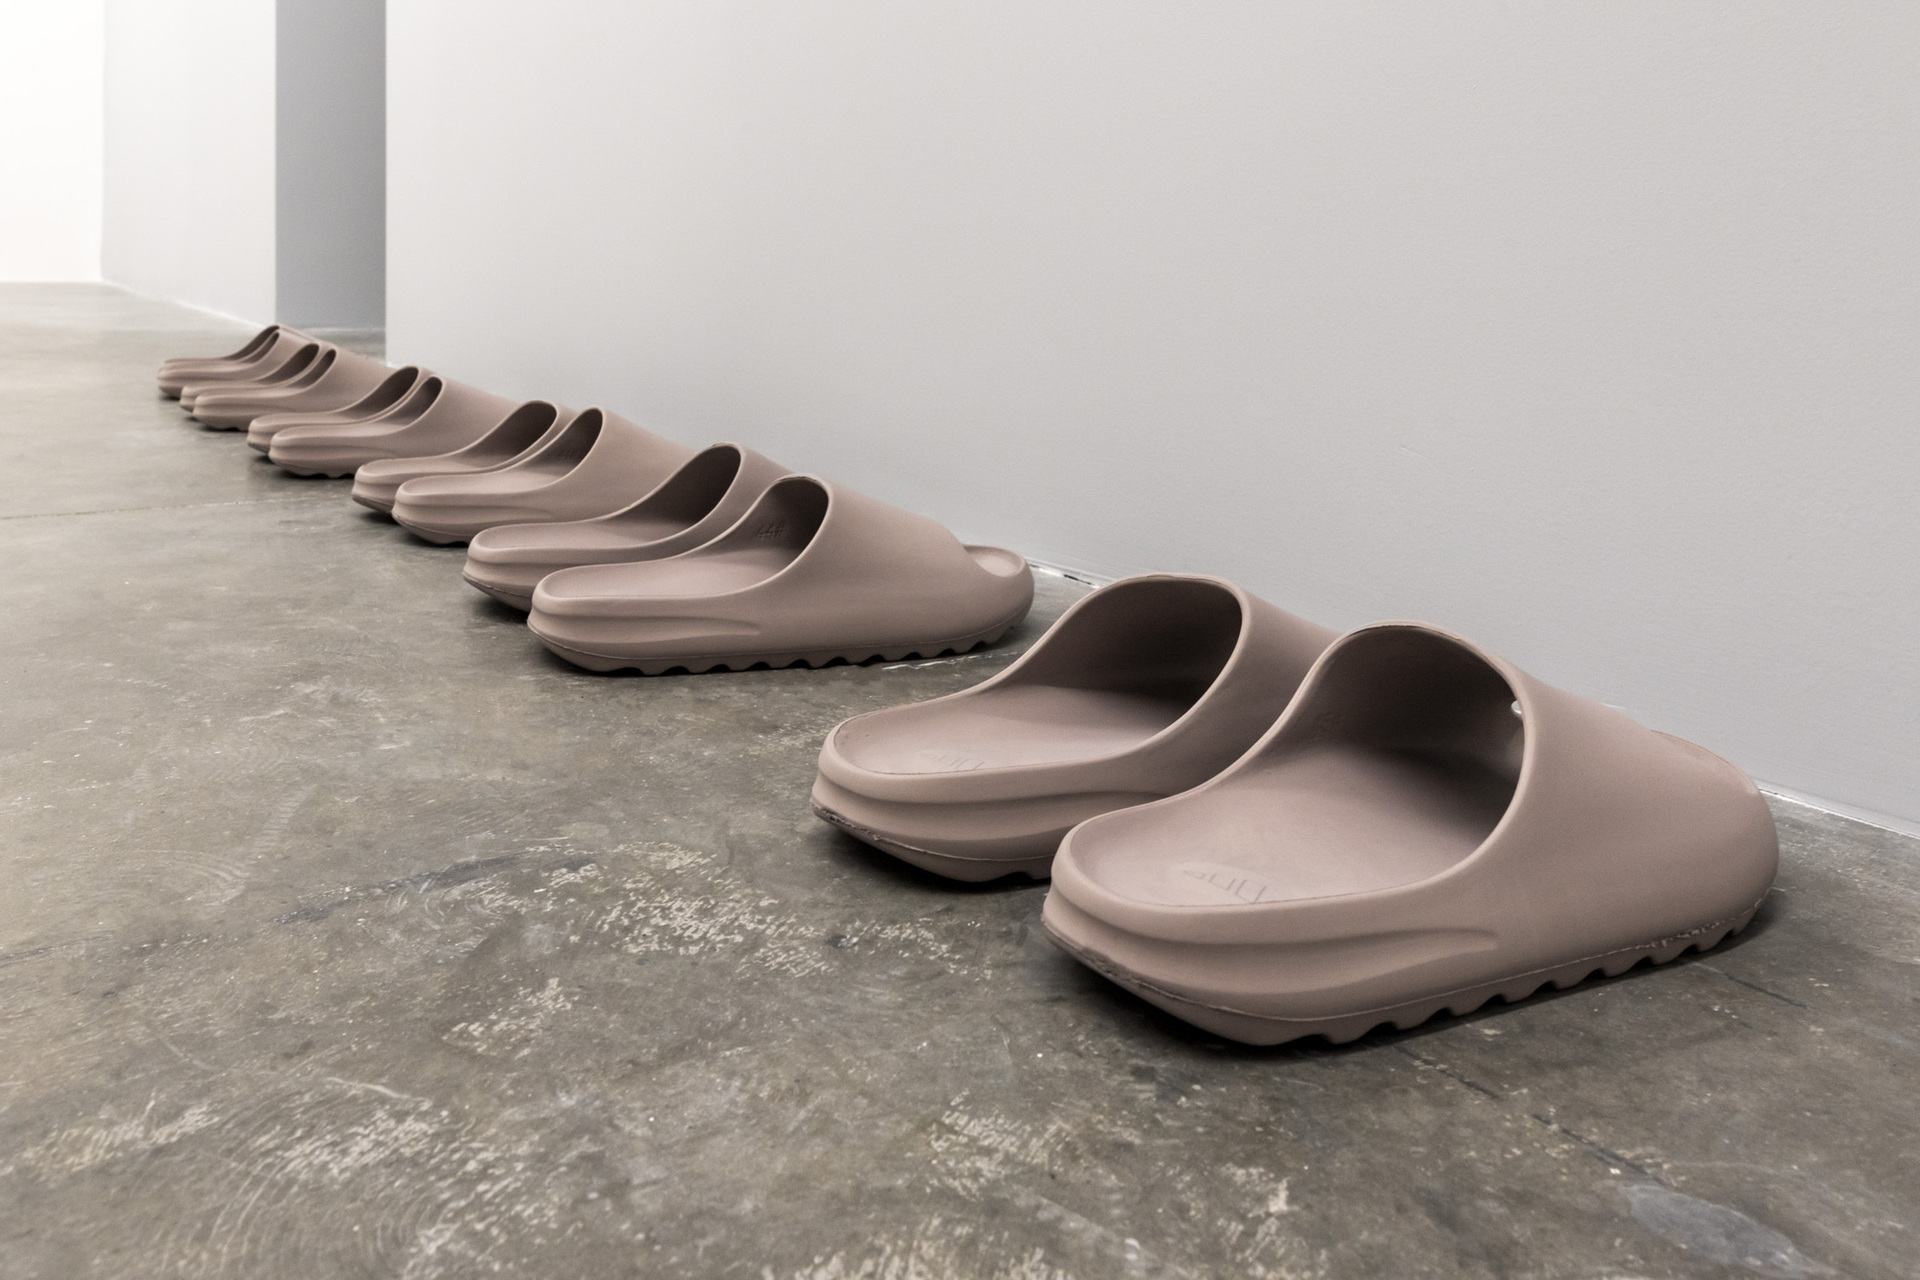 Christiane Peschek, slippers to put on before entering OASIS